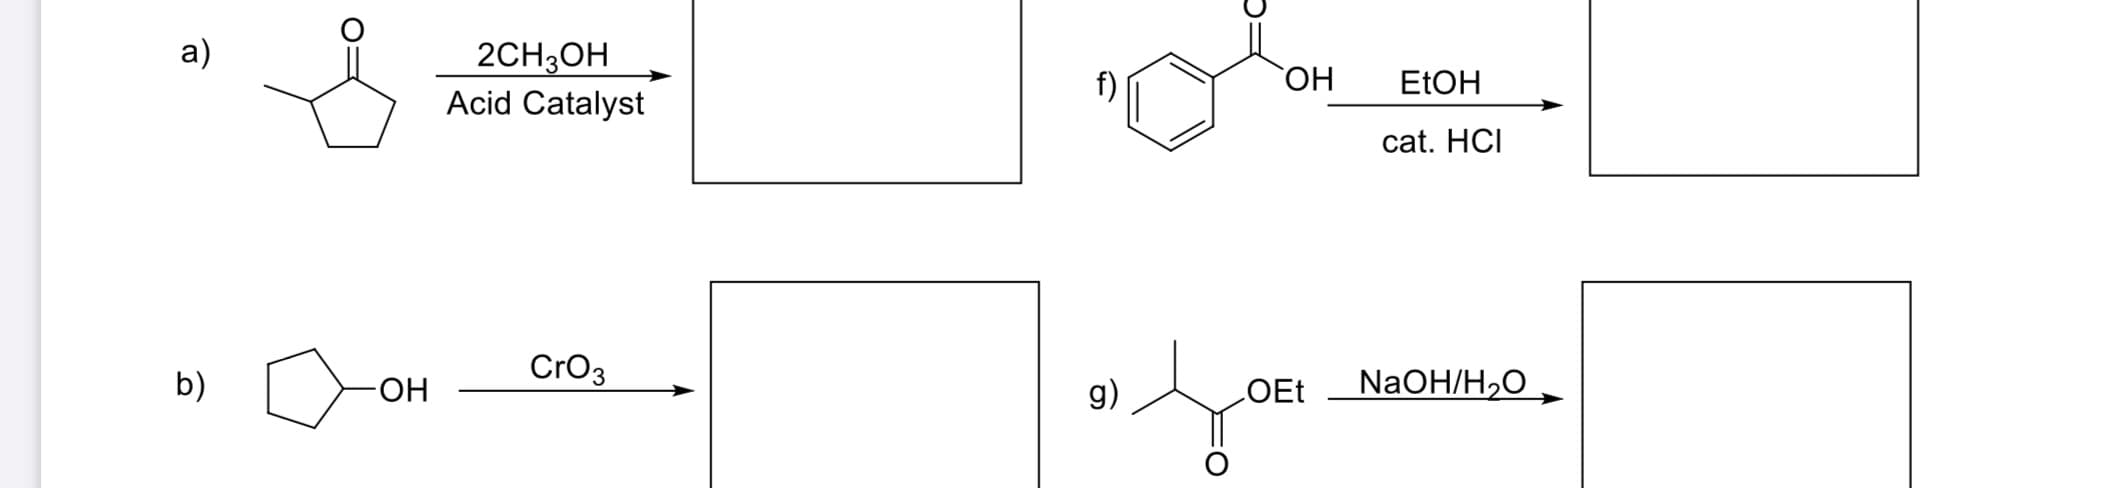 a)
2CH3OH
Acid Catalyst
